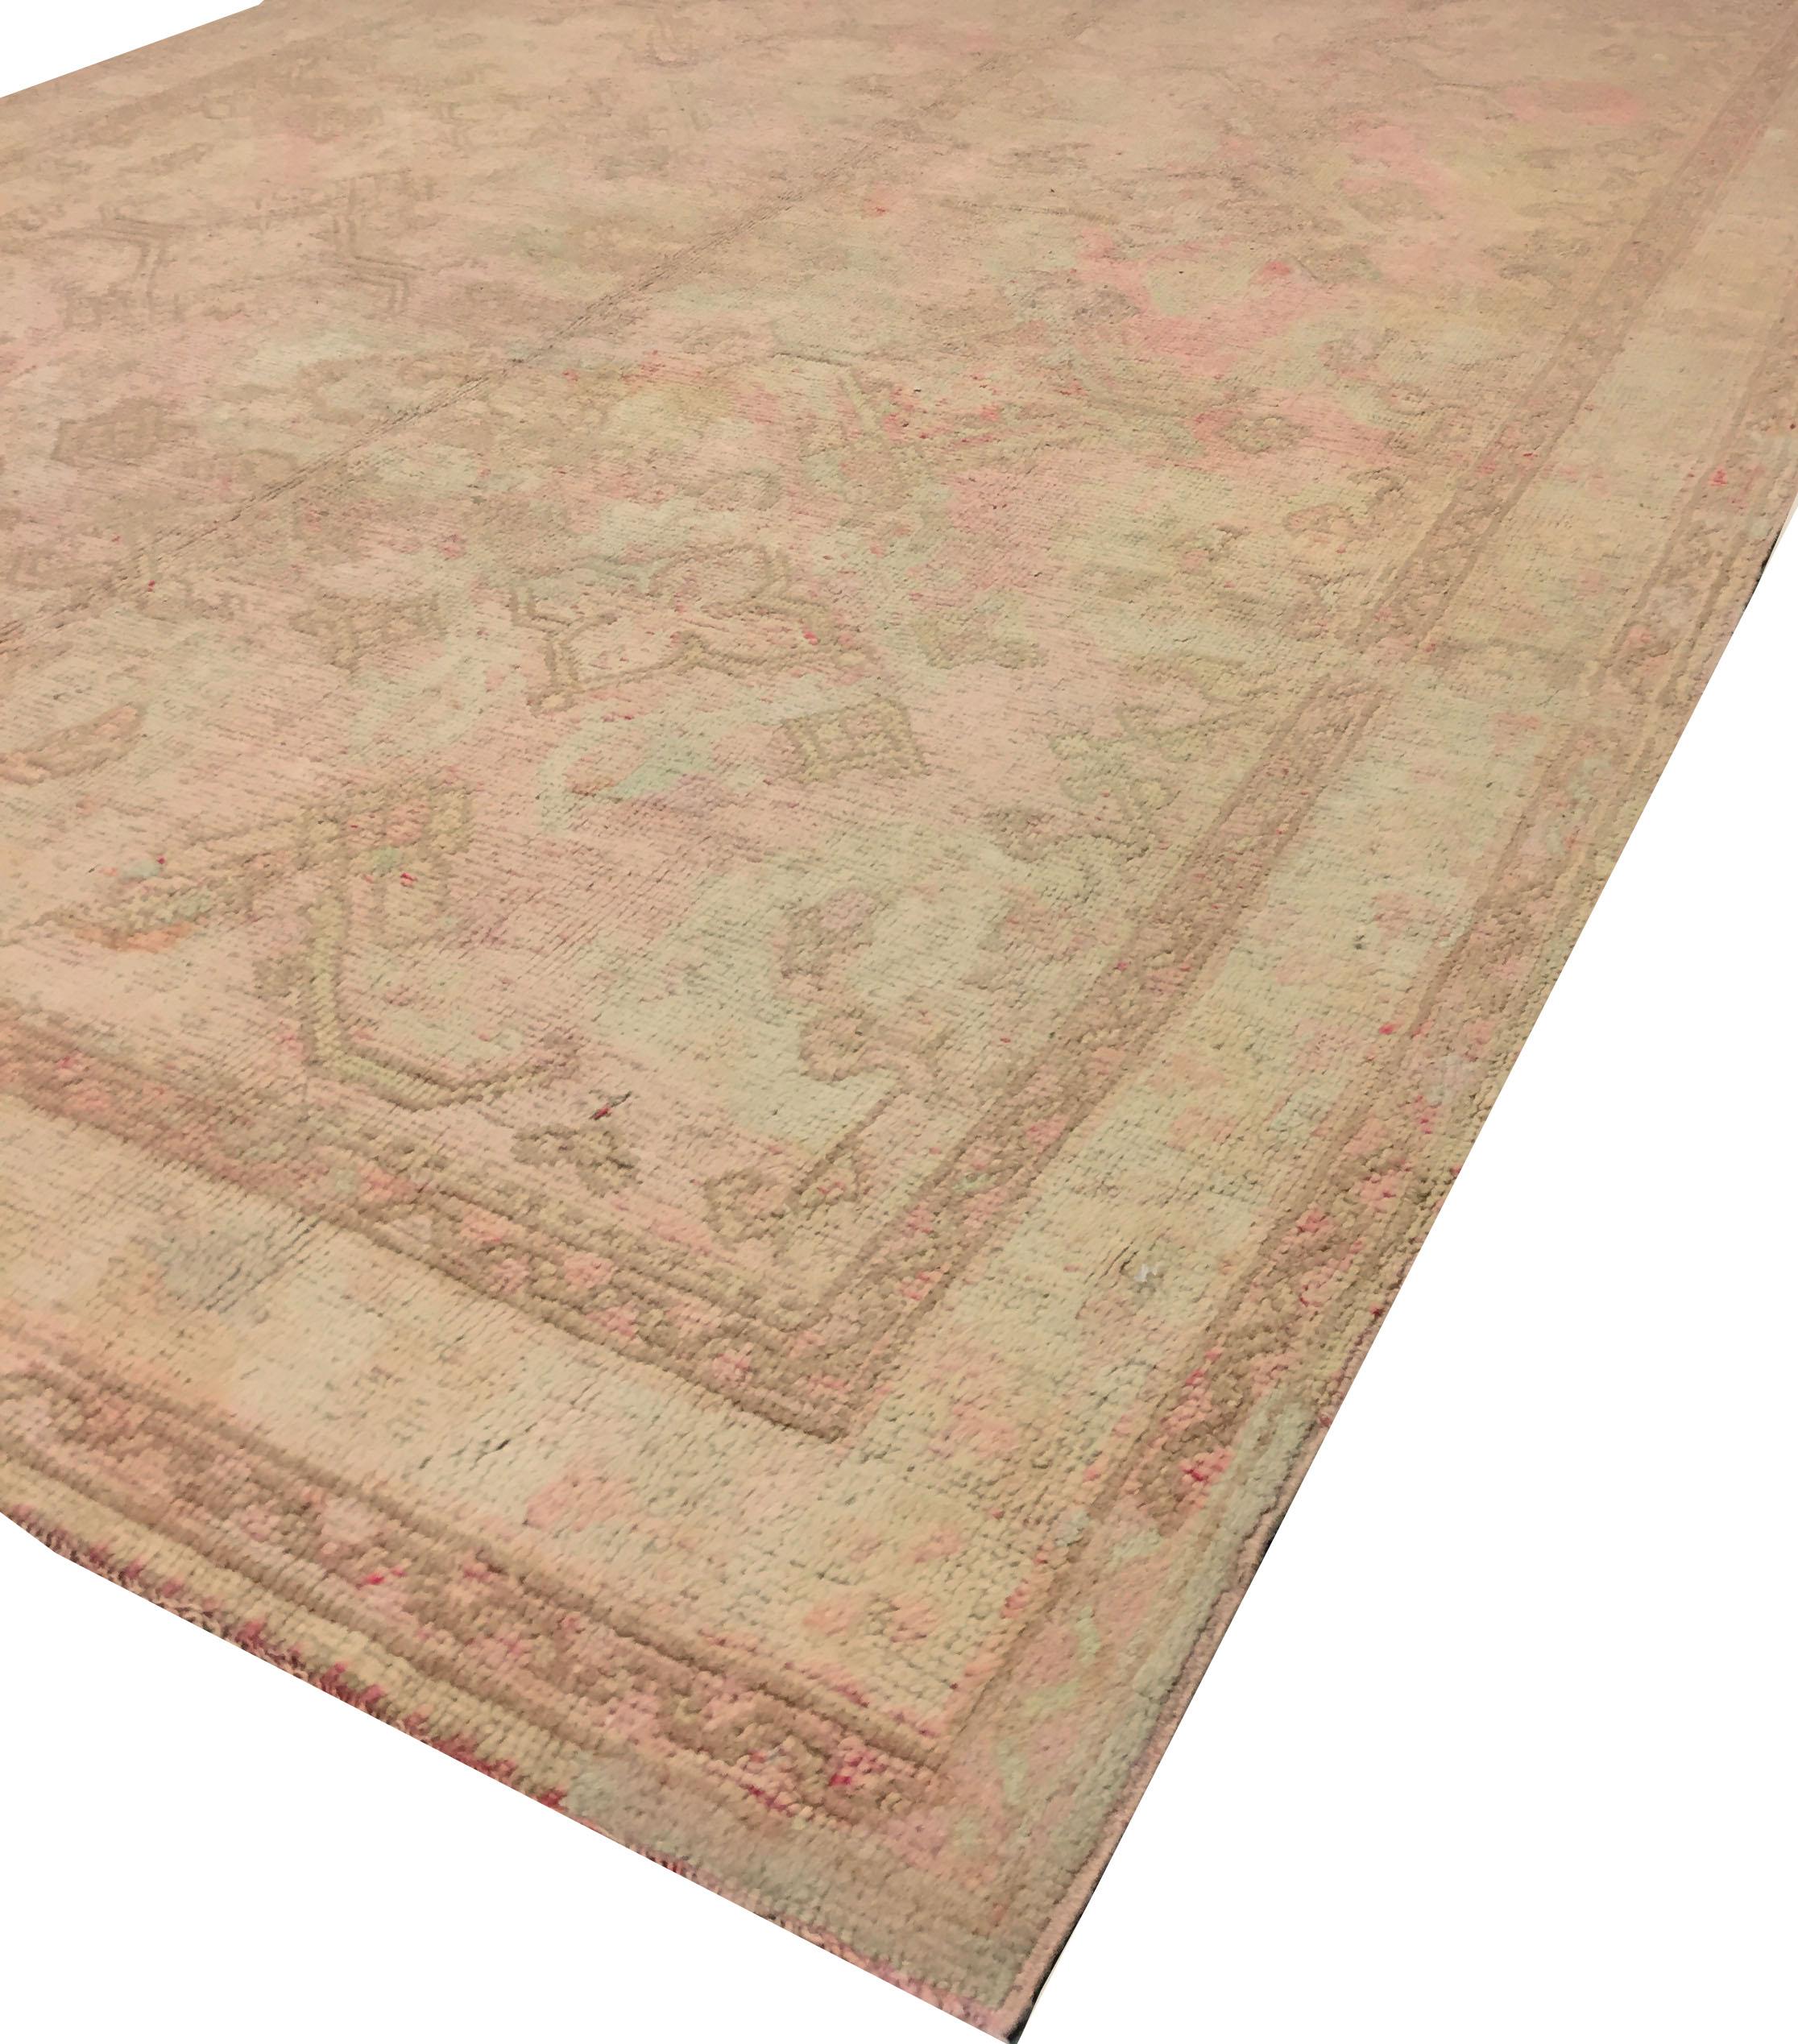 Antique Turkish Oushak Kelleh rug circa 1900 8'1 x 17'2. An unusual and special size for this gallery antique Oushak rug. Oushak's are known for their soft palettes combined with eccentric drawing. Oushak in western Turkey has the longest continuous